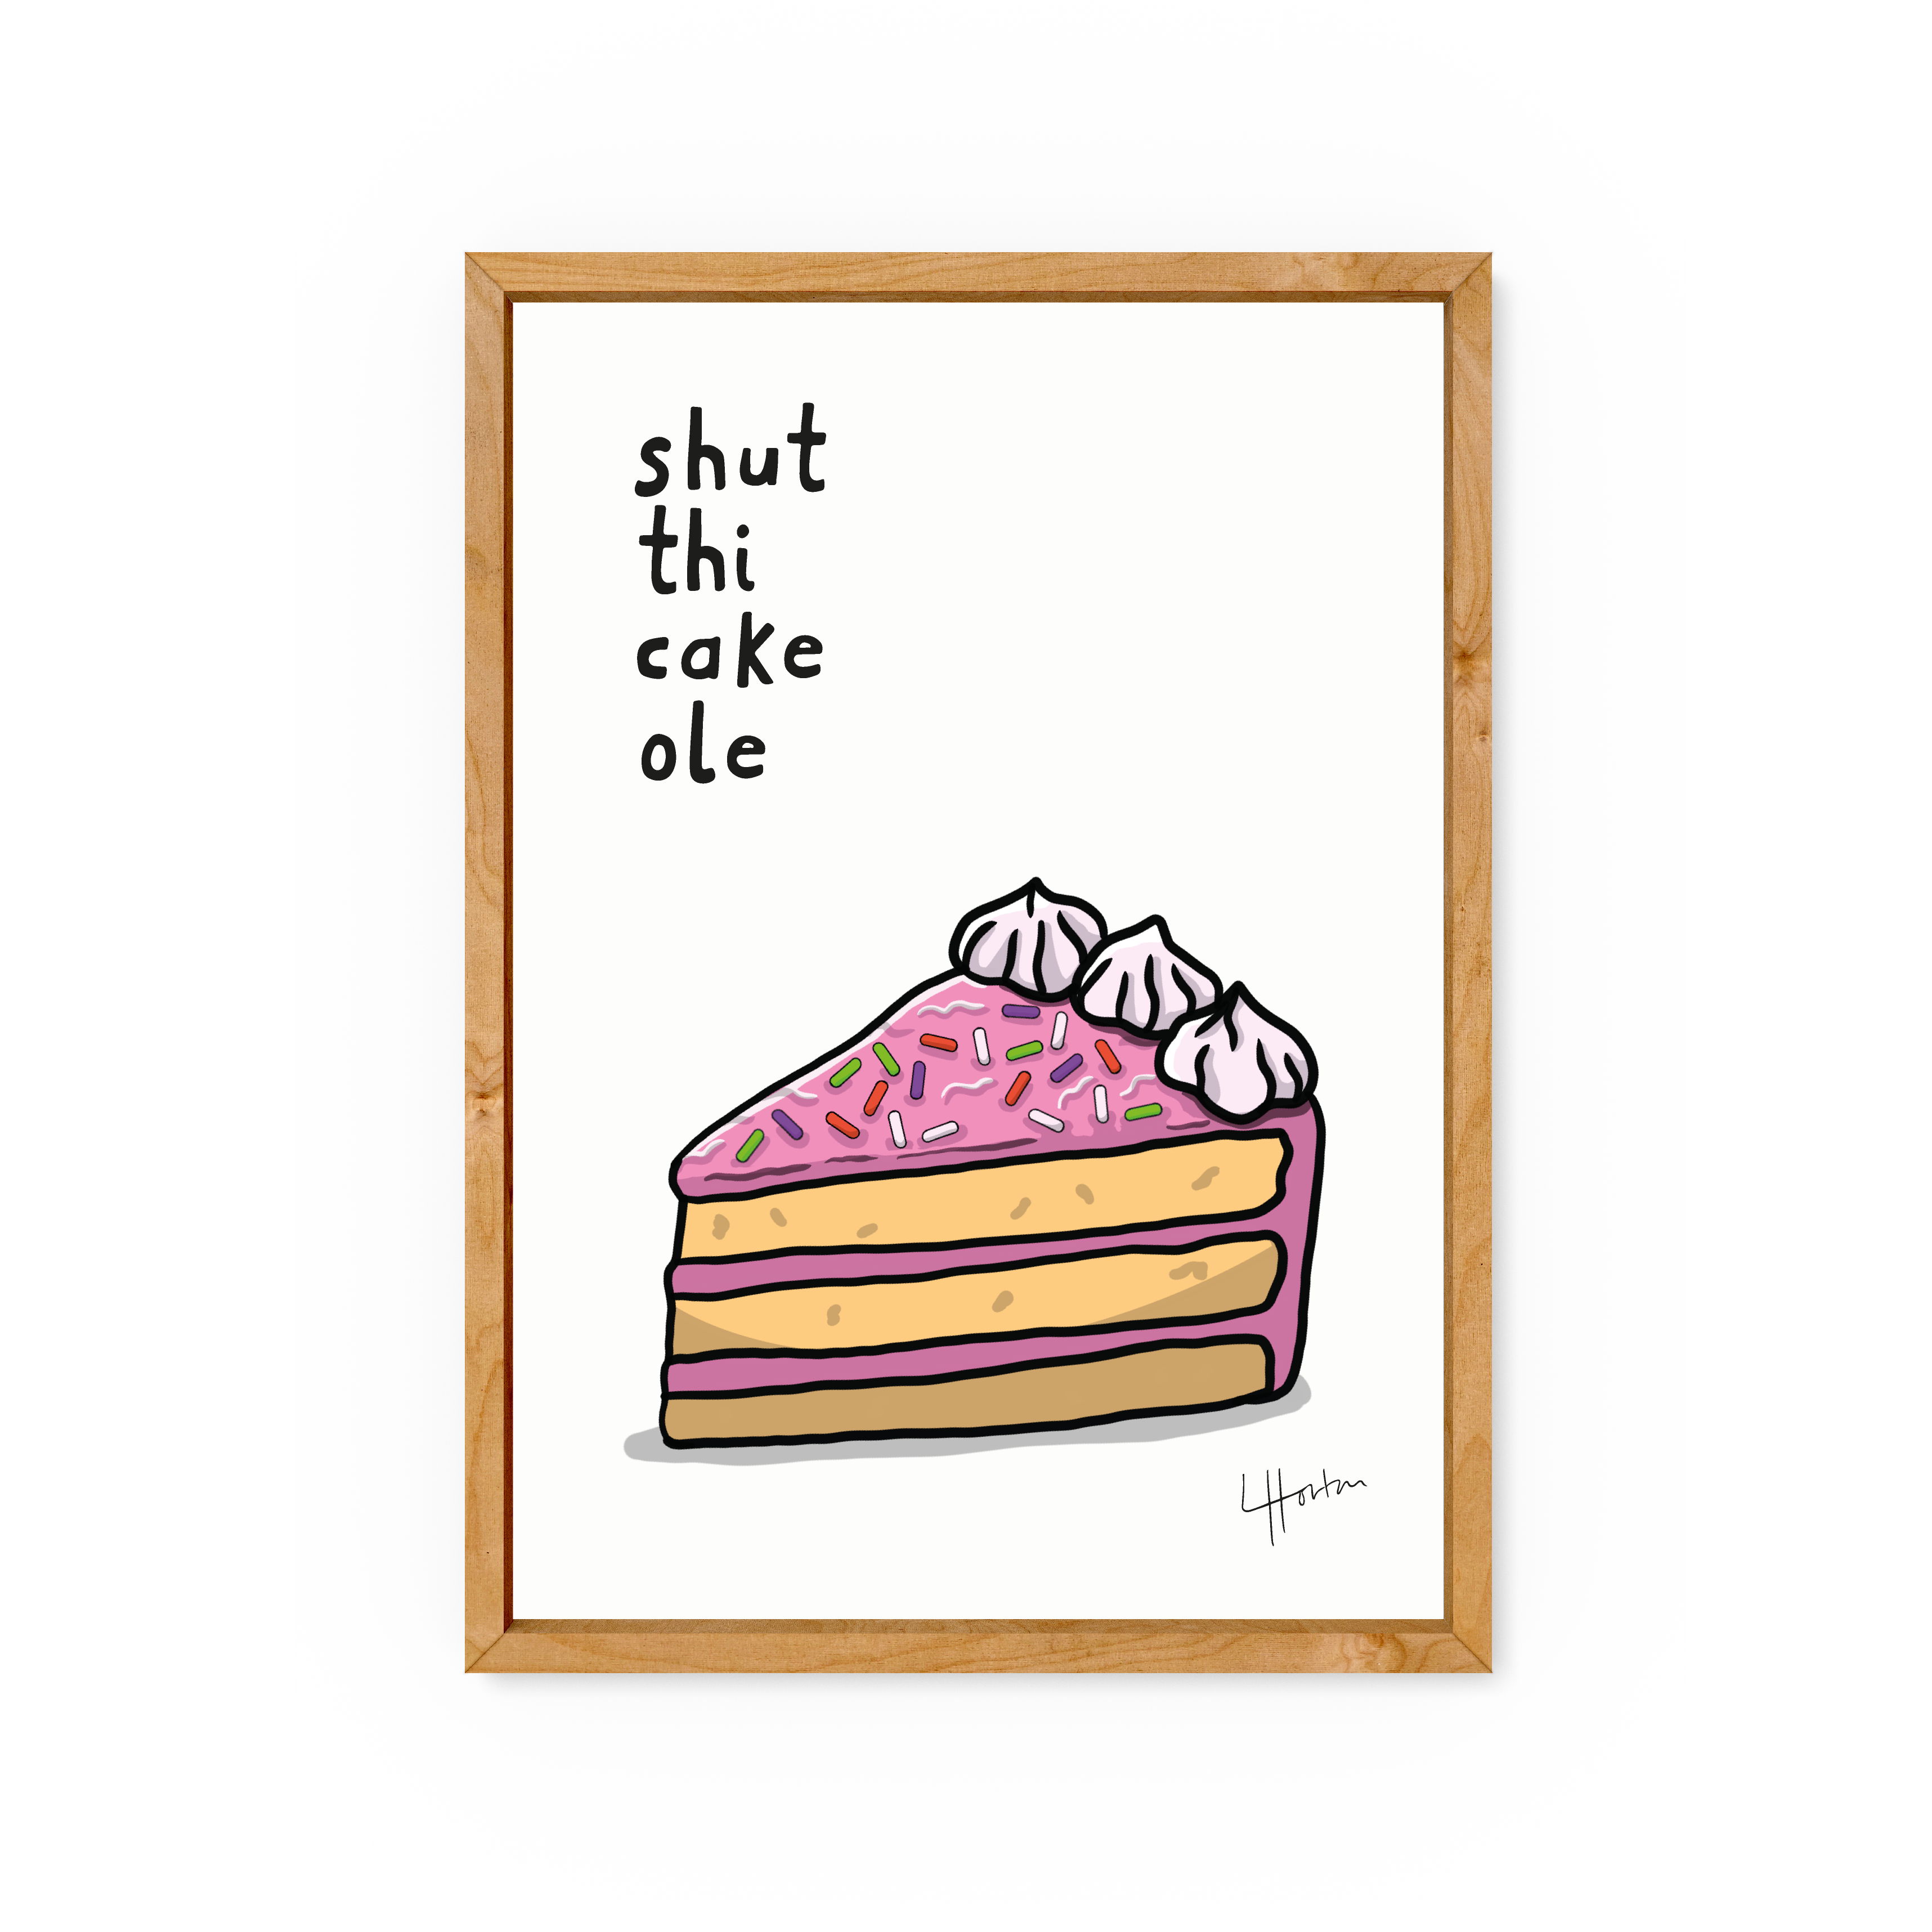 English Slang / Idioms: Piece of Cake, As Easy As Pie - YouTube